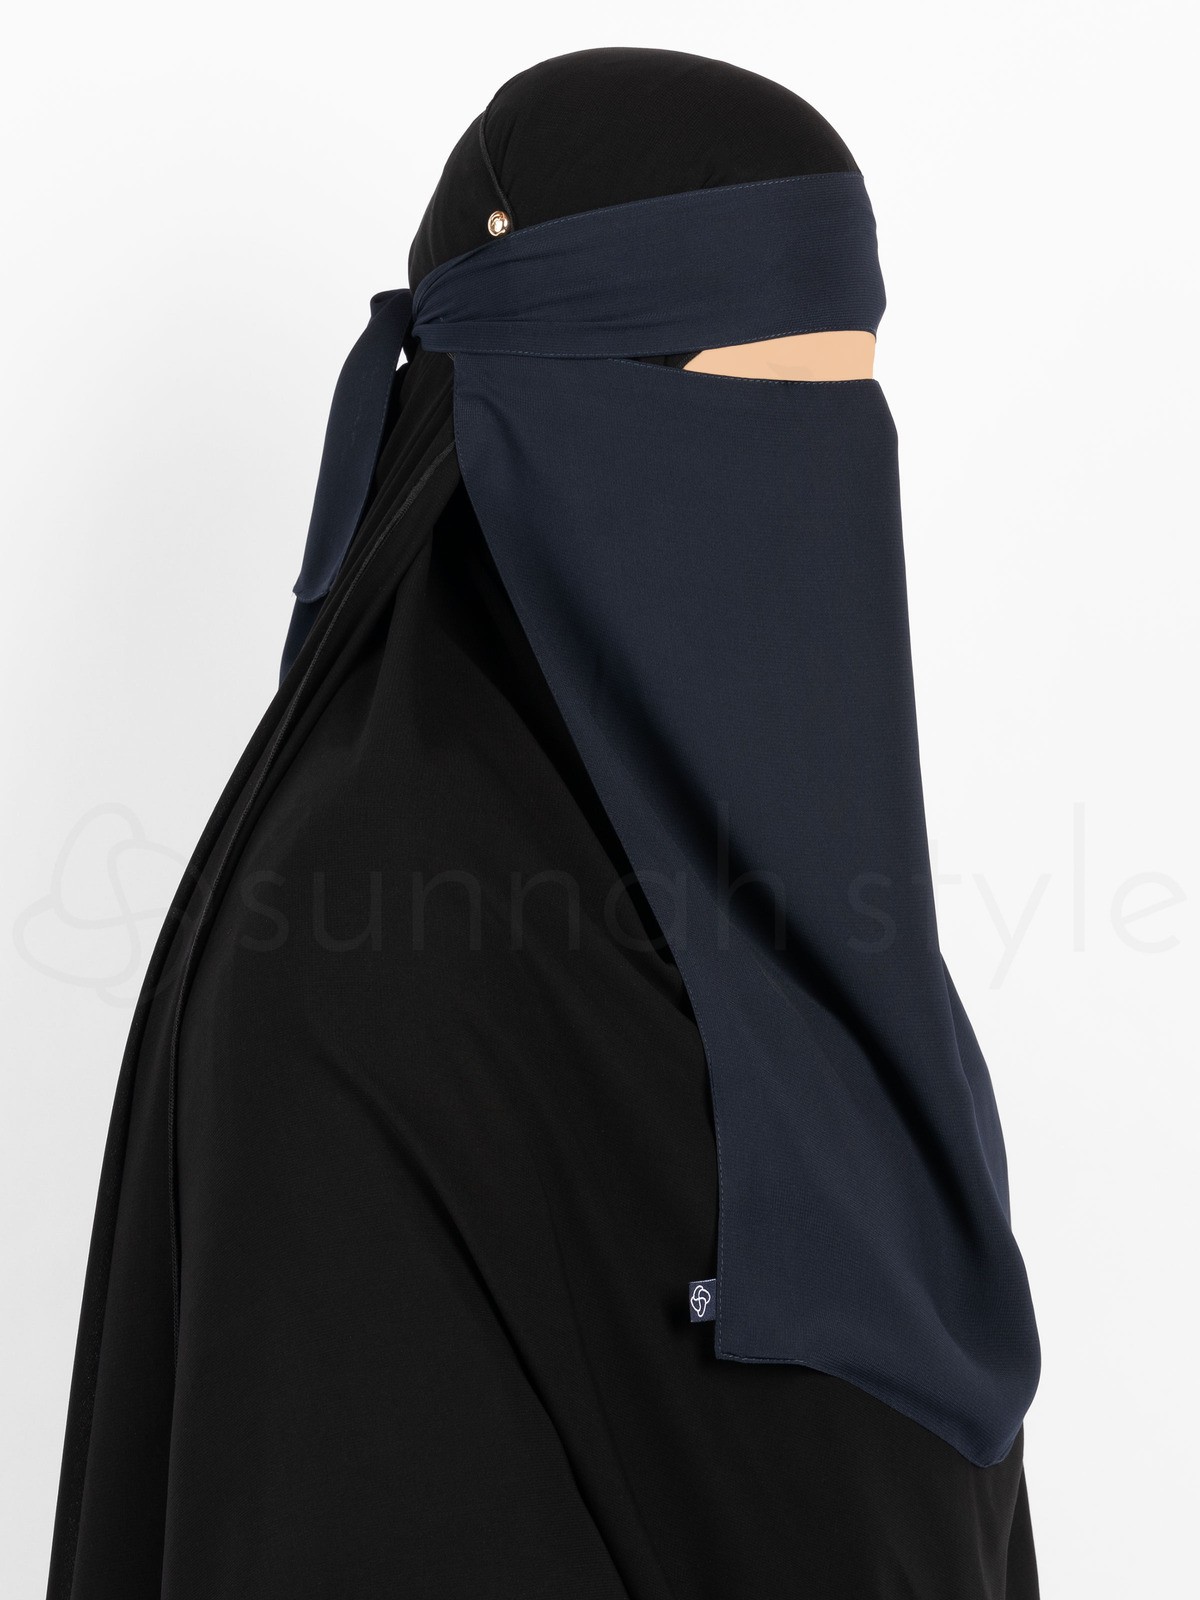 Sunnah Style - Pull-Down One Layer Niqab (Parfait)